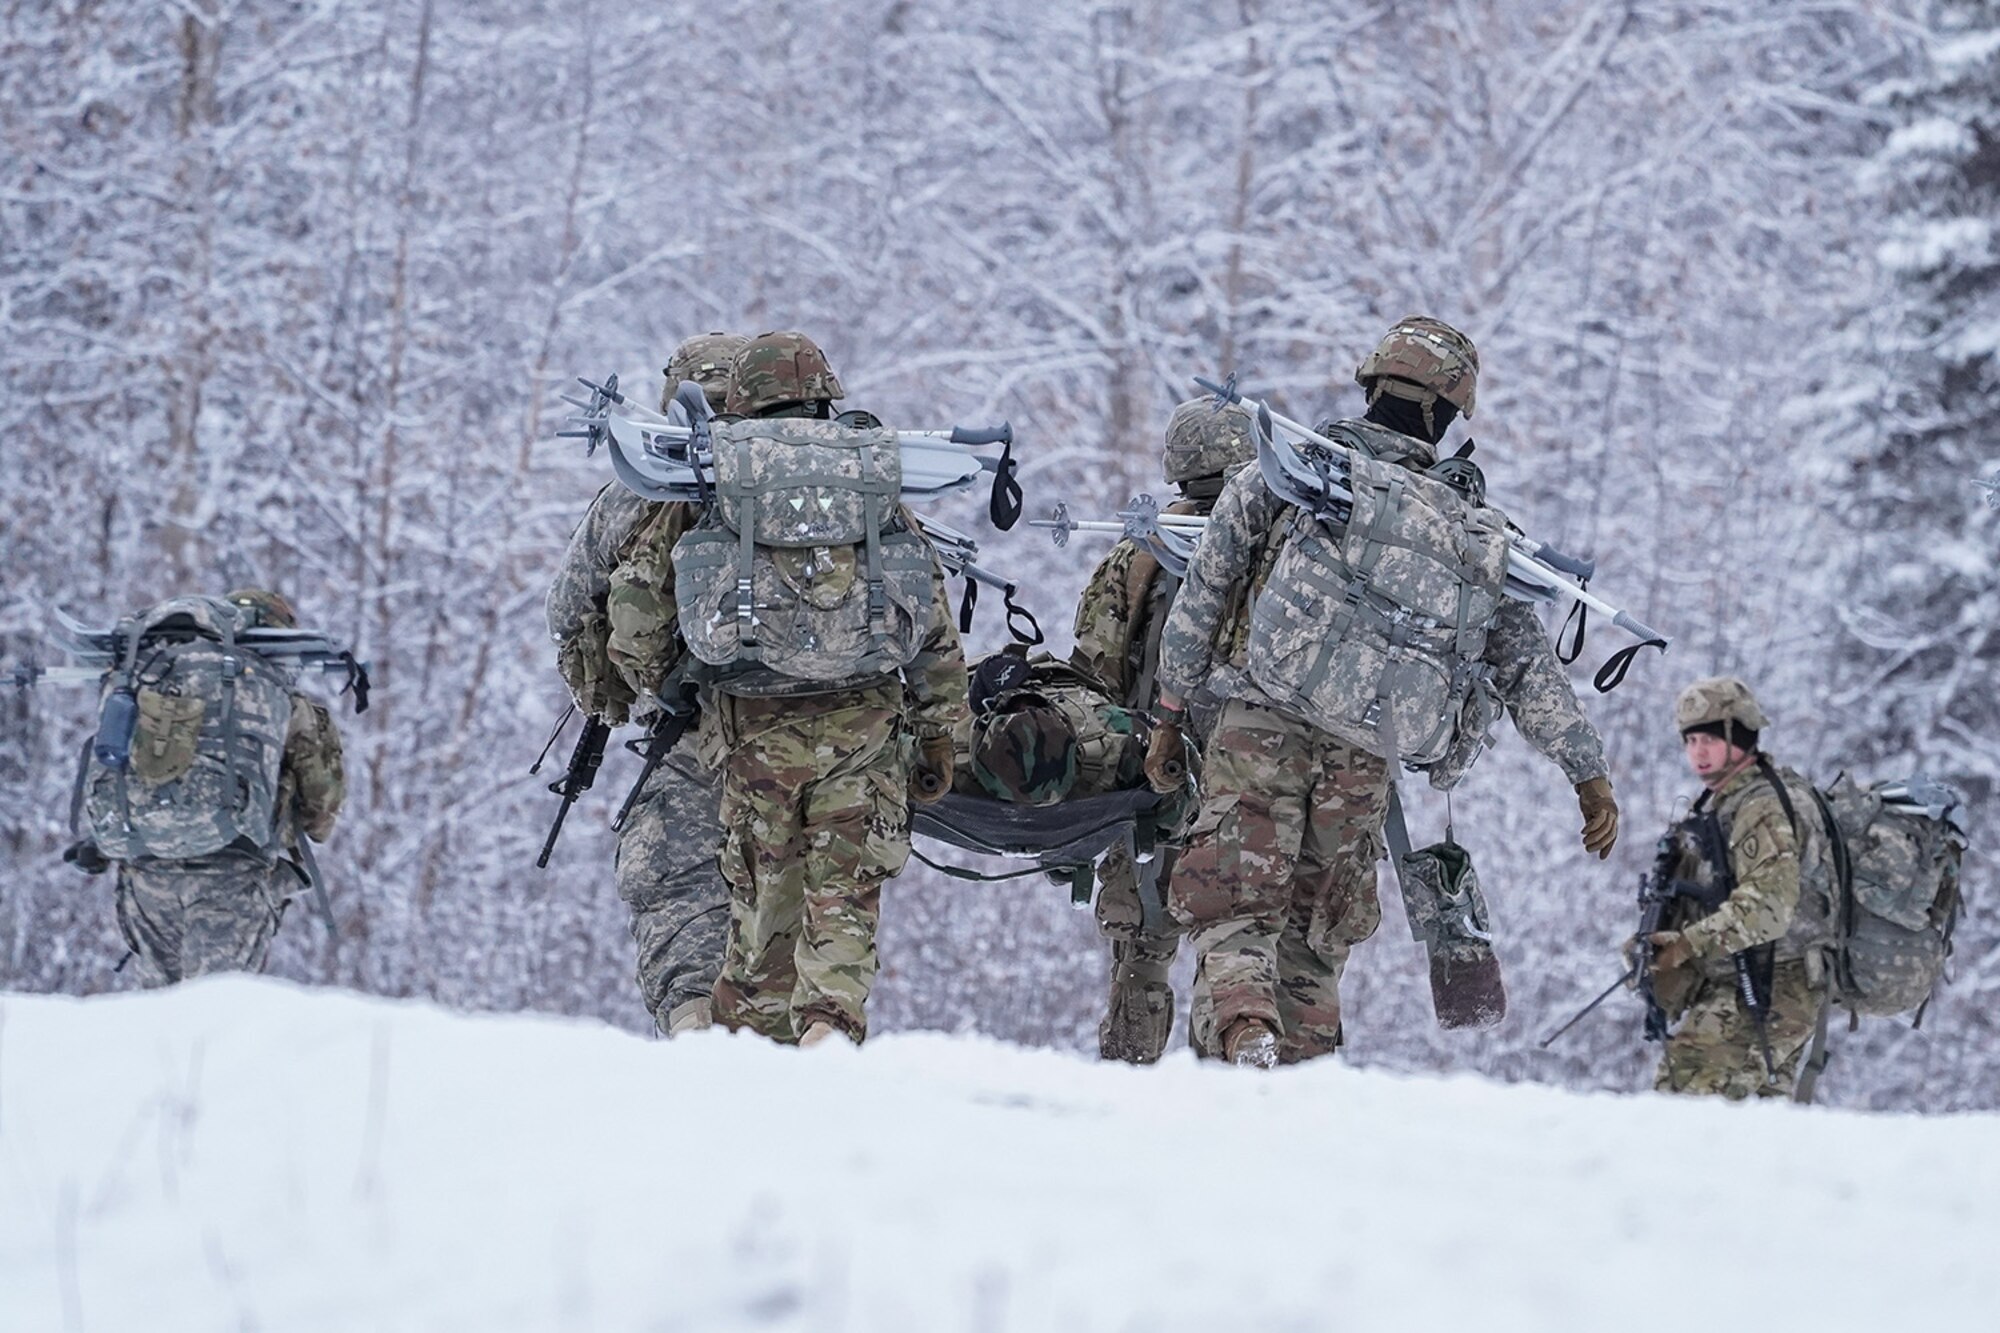 Medics from the 6th Brigade Engineer Battalion (Airborne), 4th Infantry Brigade Combat Team (Airborne), 25th Infantry Division, U.S. Army Alaska, carry a simulated casualty to an extraction point while training with aviators from the Alaska Army National Guard at Neibhur Drop Zone, Nov. 26, 2019, to hone their life-saving and Medevac hoist skills for the paratroopers’ upcoming rotation to the Joint Readiness Training Center at Fort Polk, La.